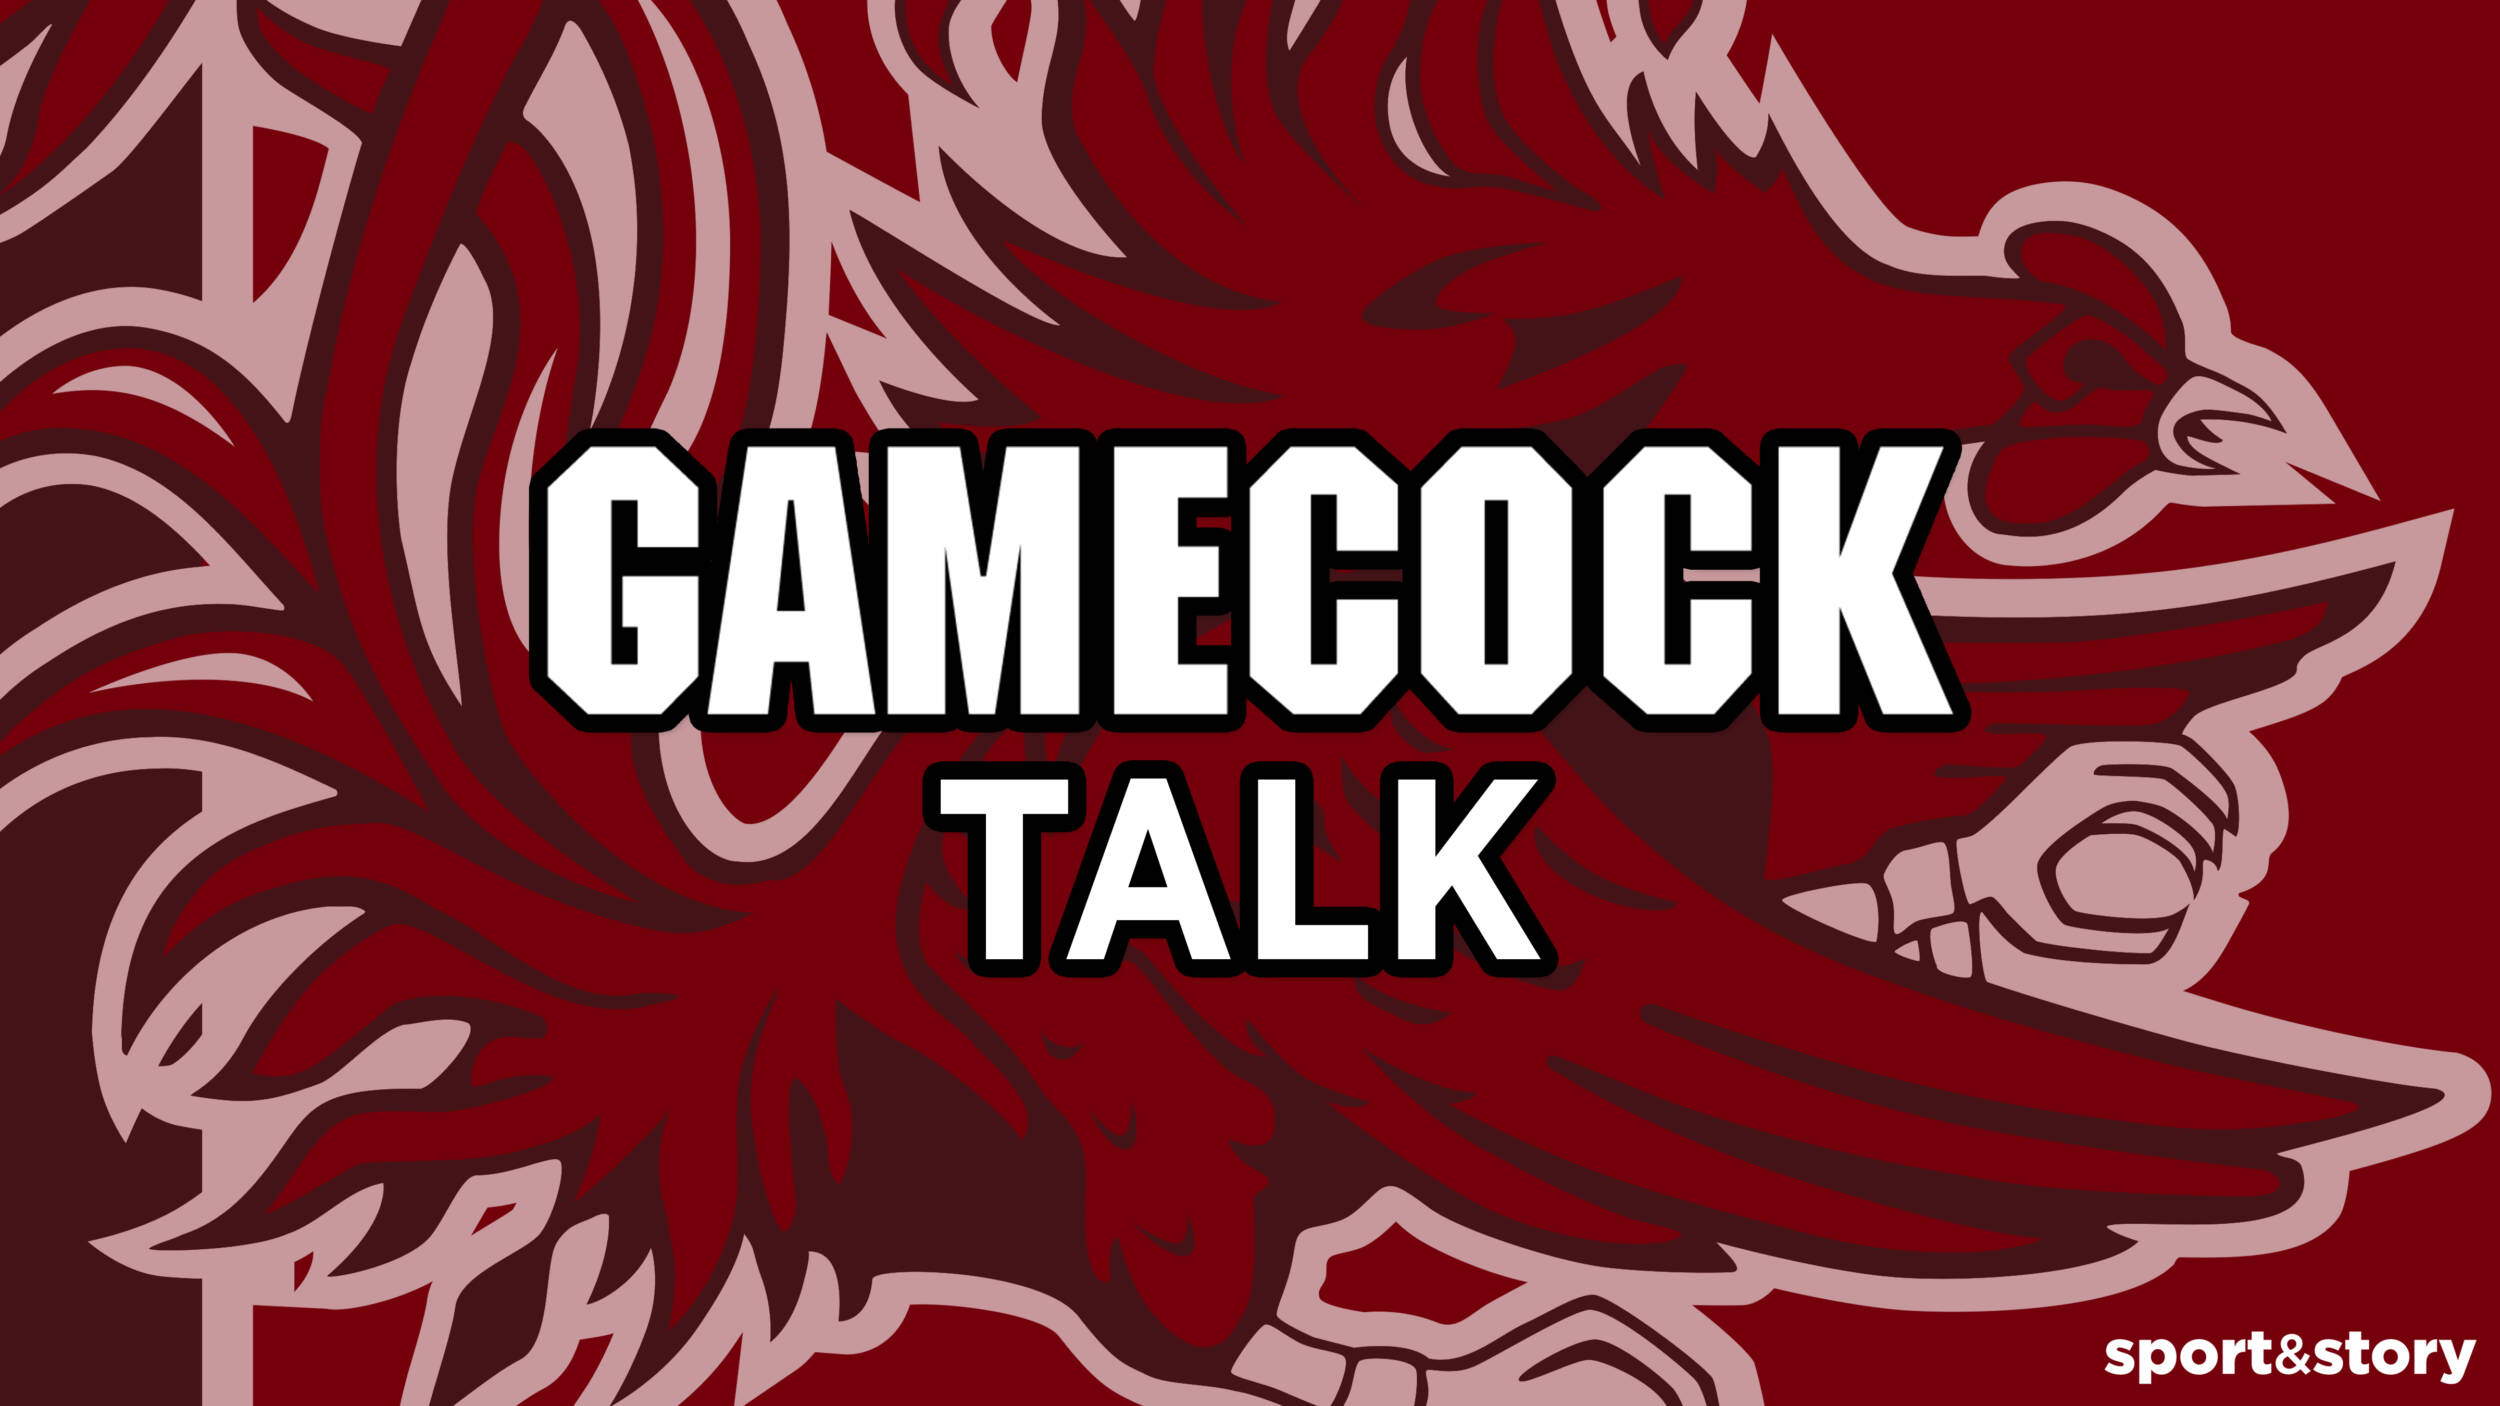 Gamecock Talk: Introducing the Official Podcast of South Carolina Athletics